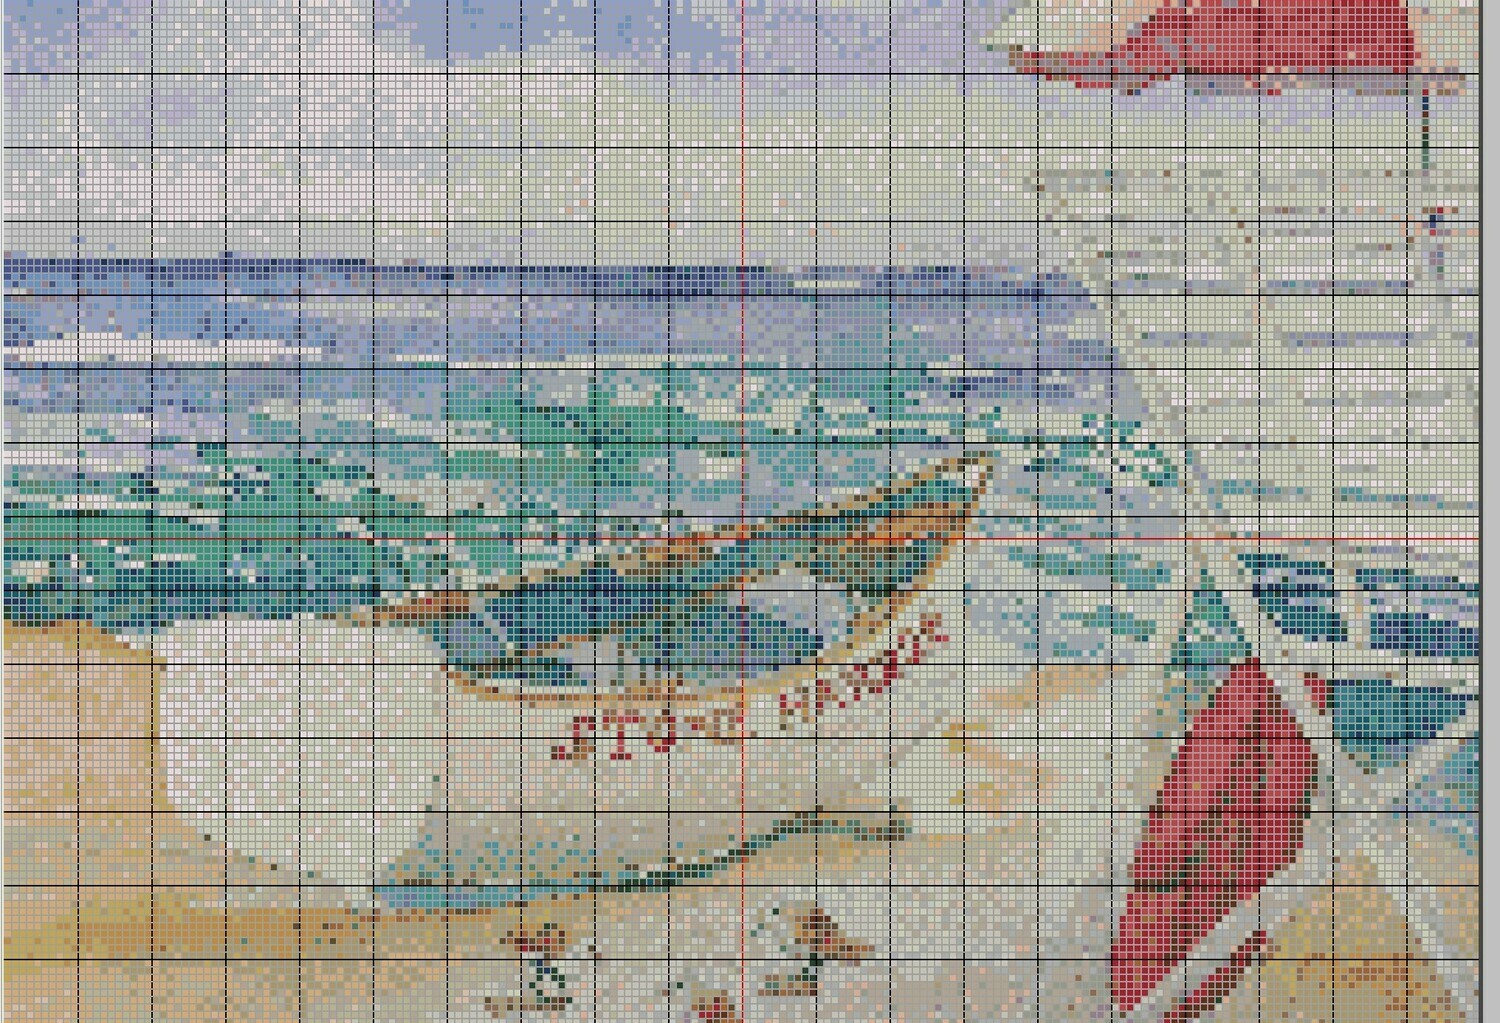 Stone Harbor Cross Stitch -  Beach and Lifeguard Boat - Pattern Only - Instant Digital Download